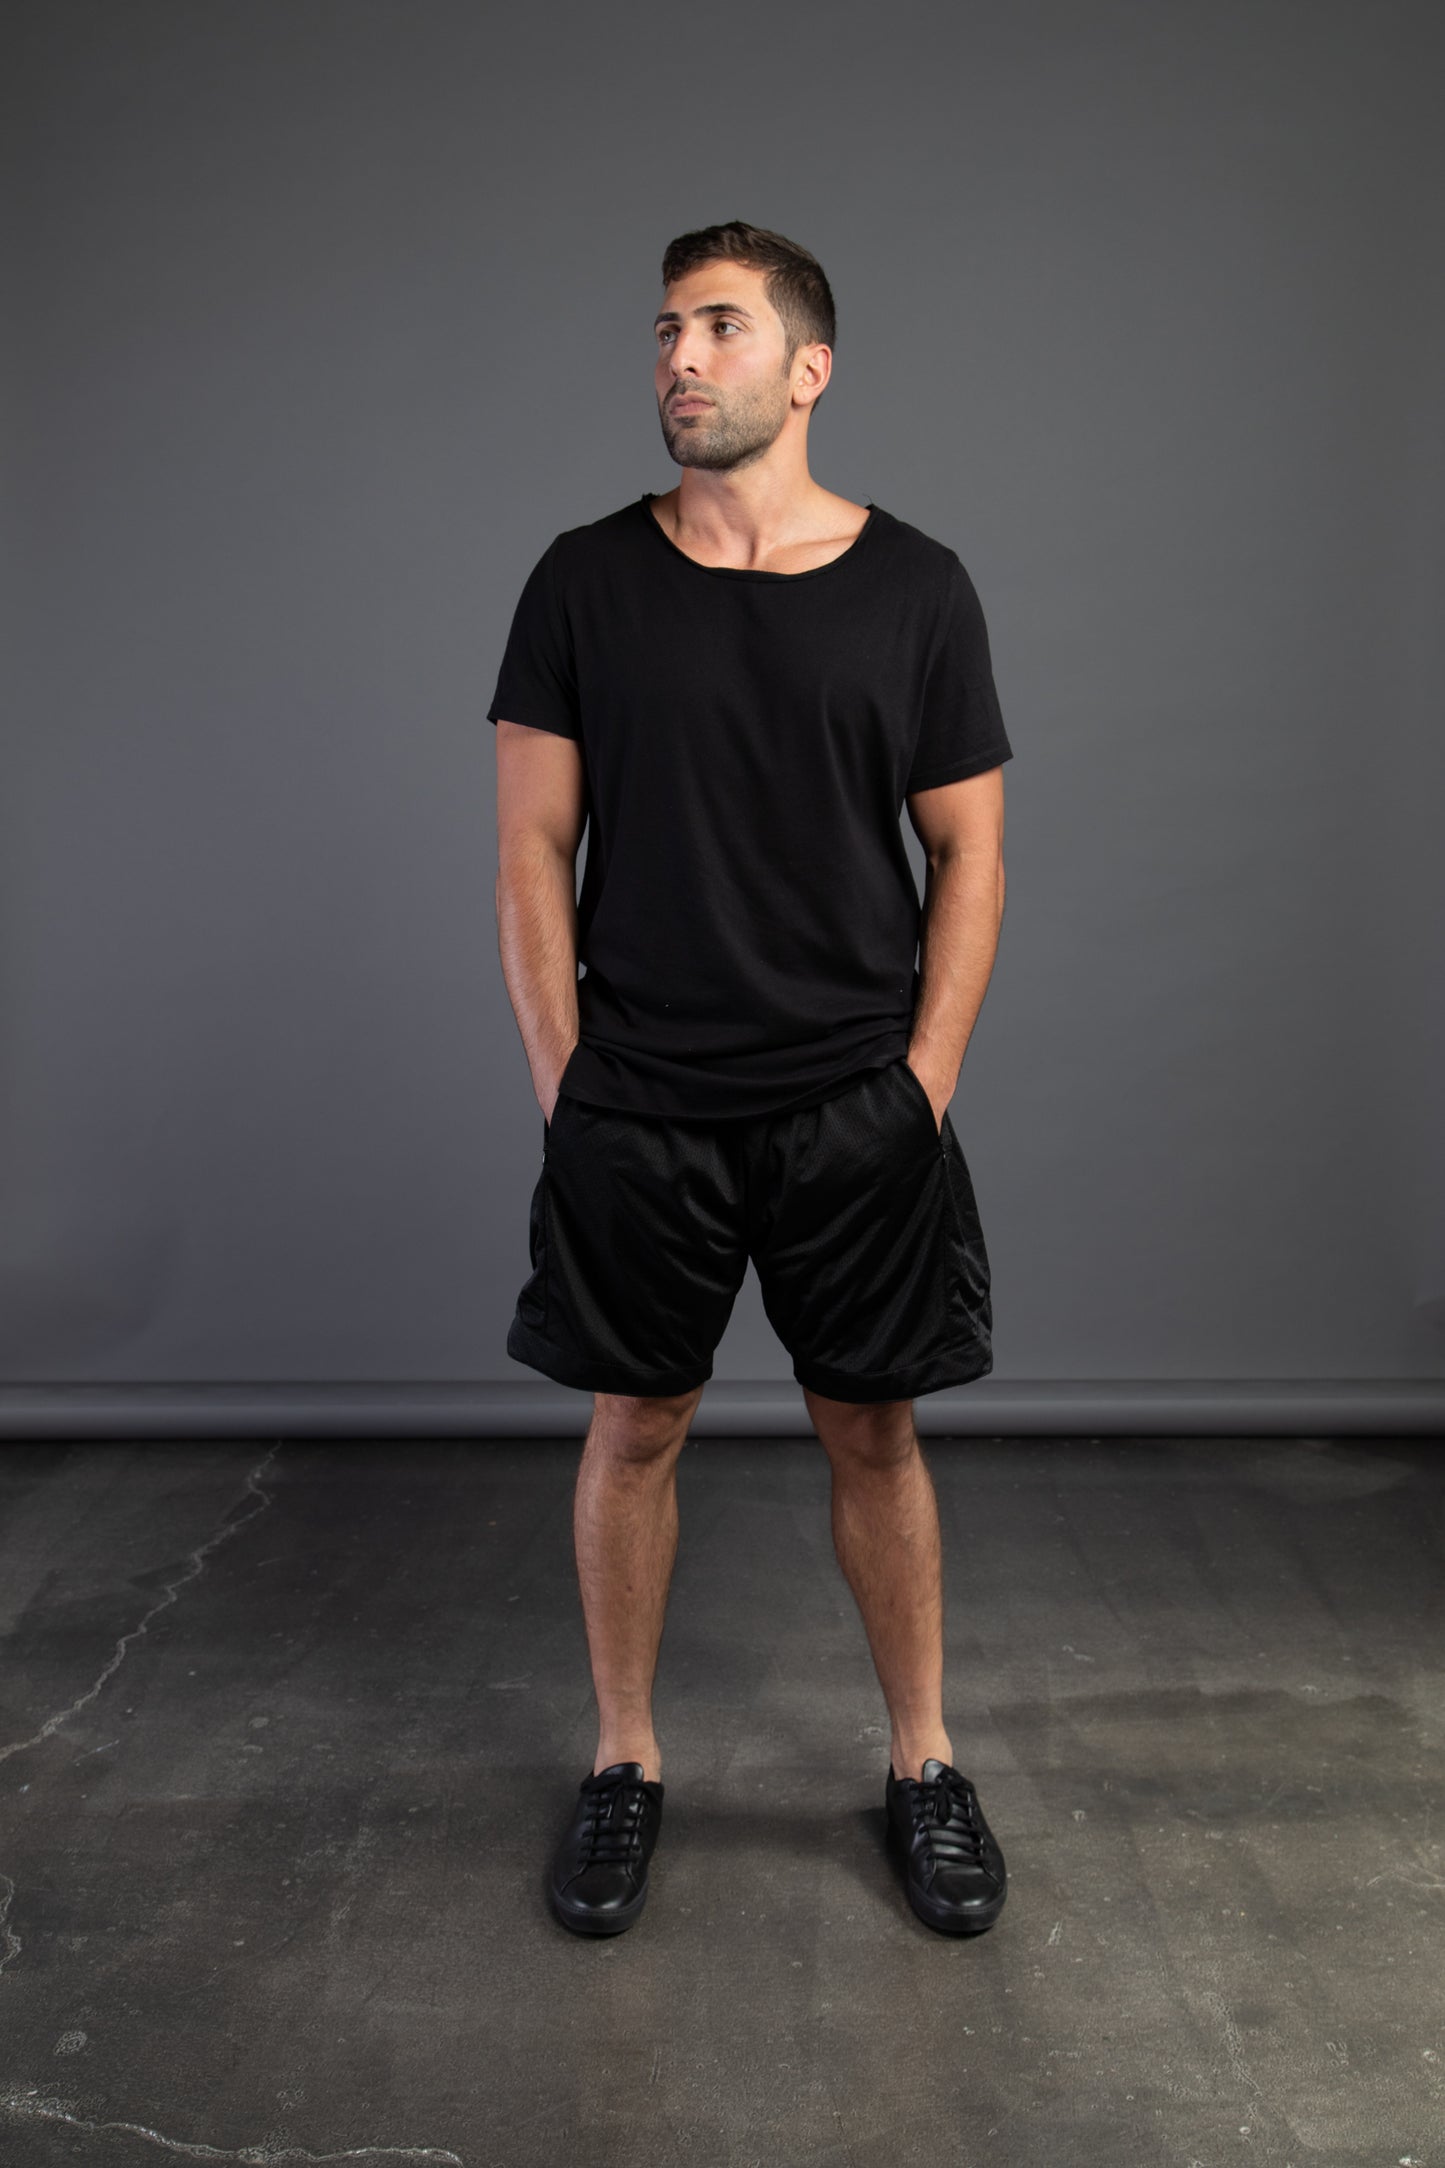 Cut and Sew - "All Day" Ball Shorts - Black